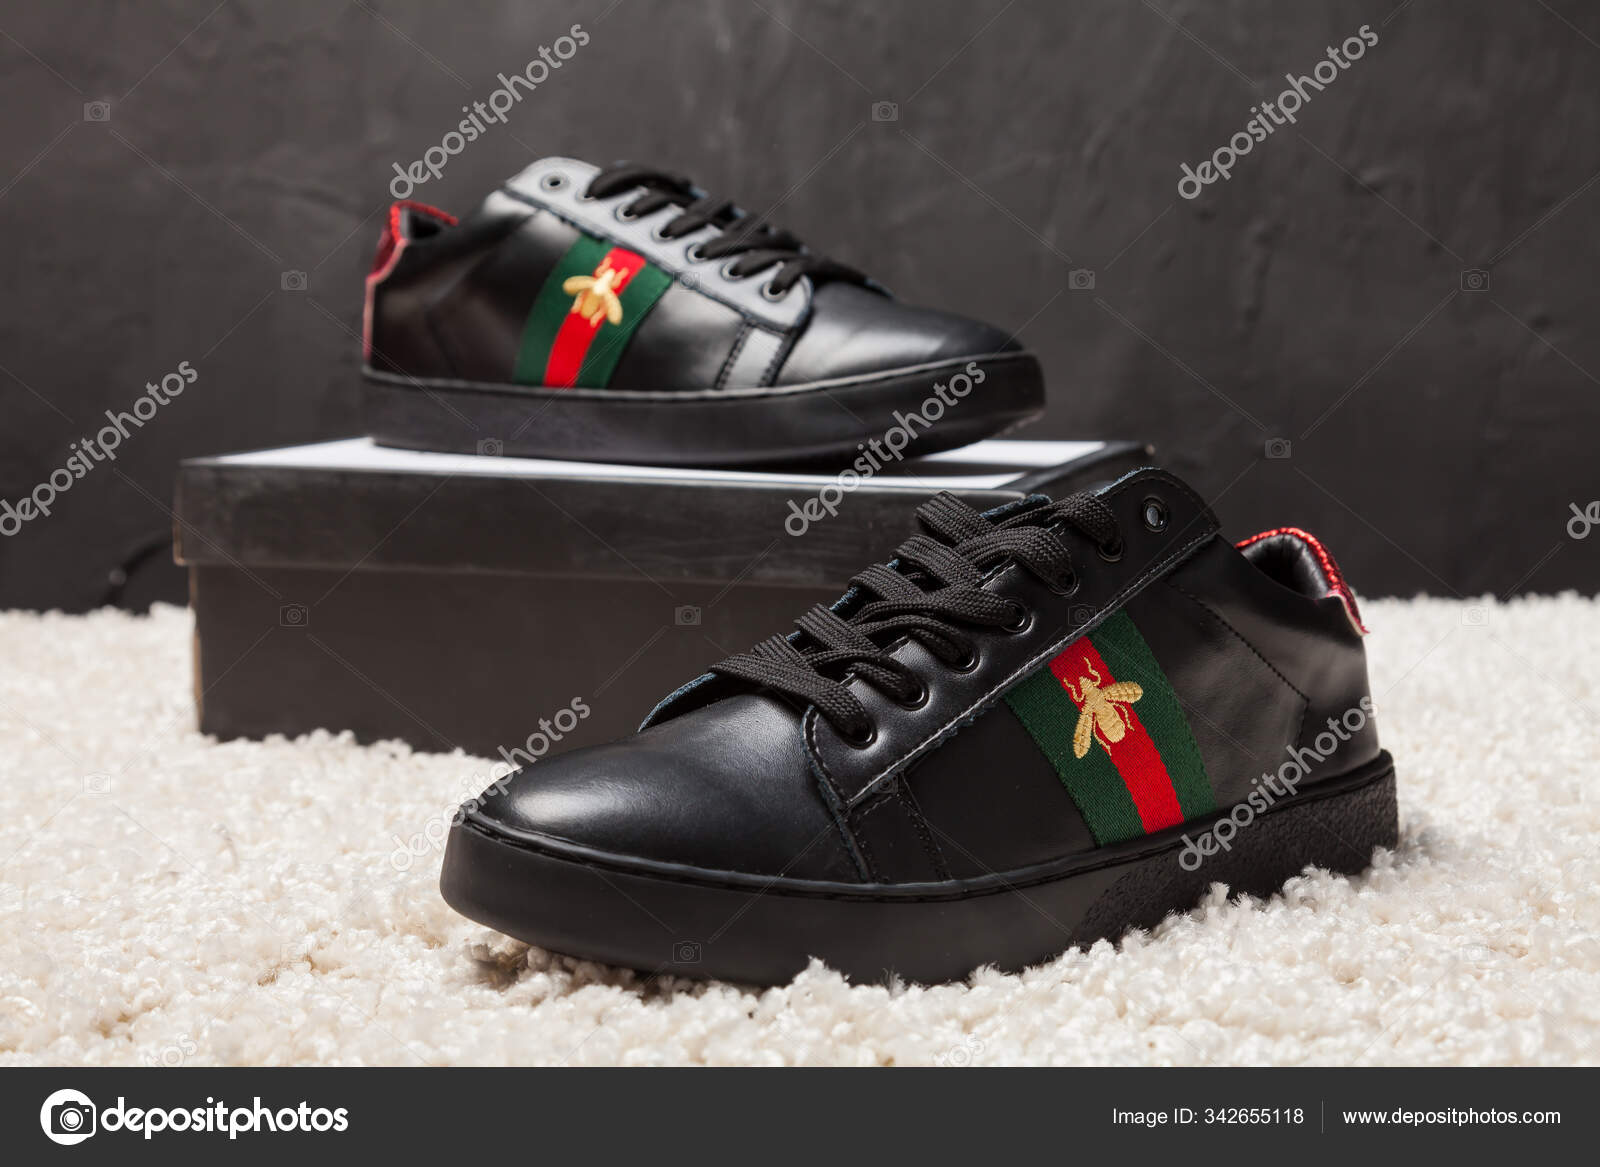 Beautiful Nice Adidas Gucci Running Shoes Sneakers Trainers – Stock Editorial Photo © sozon #342655118